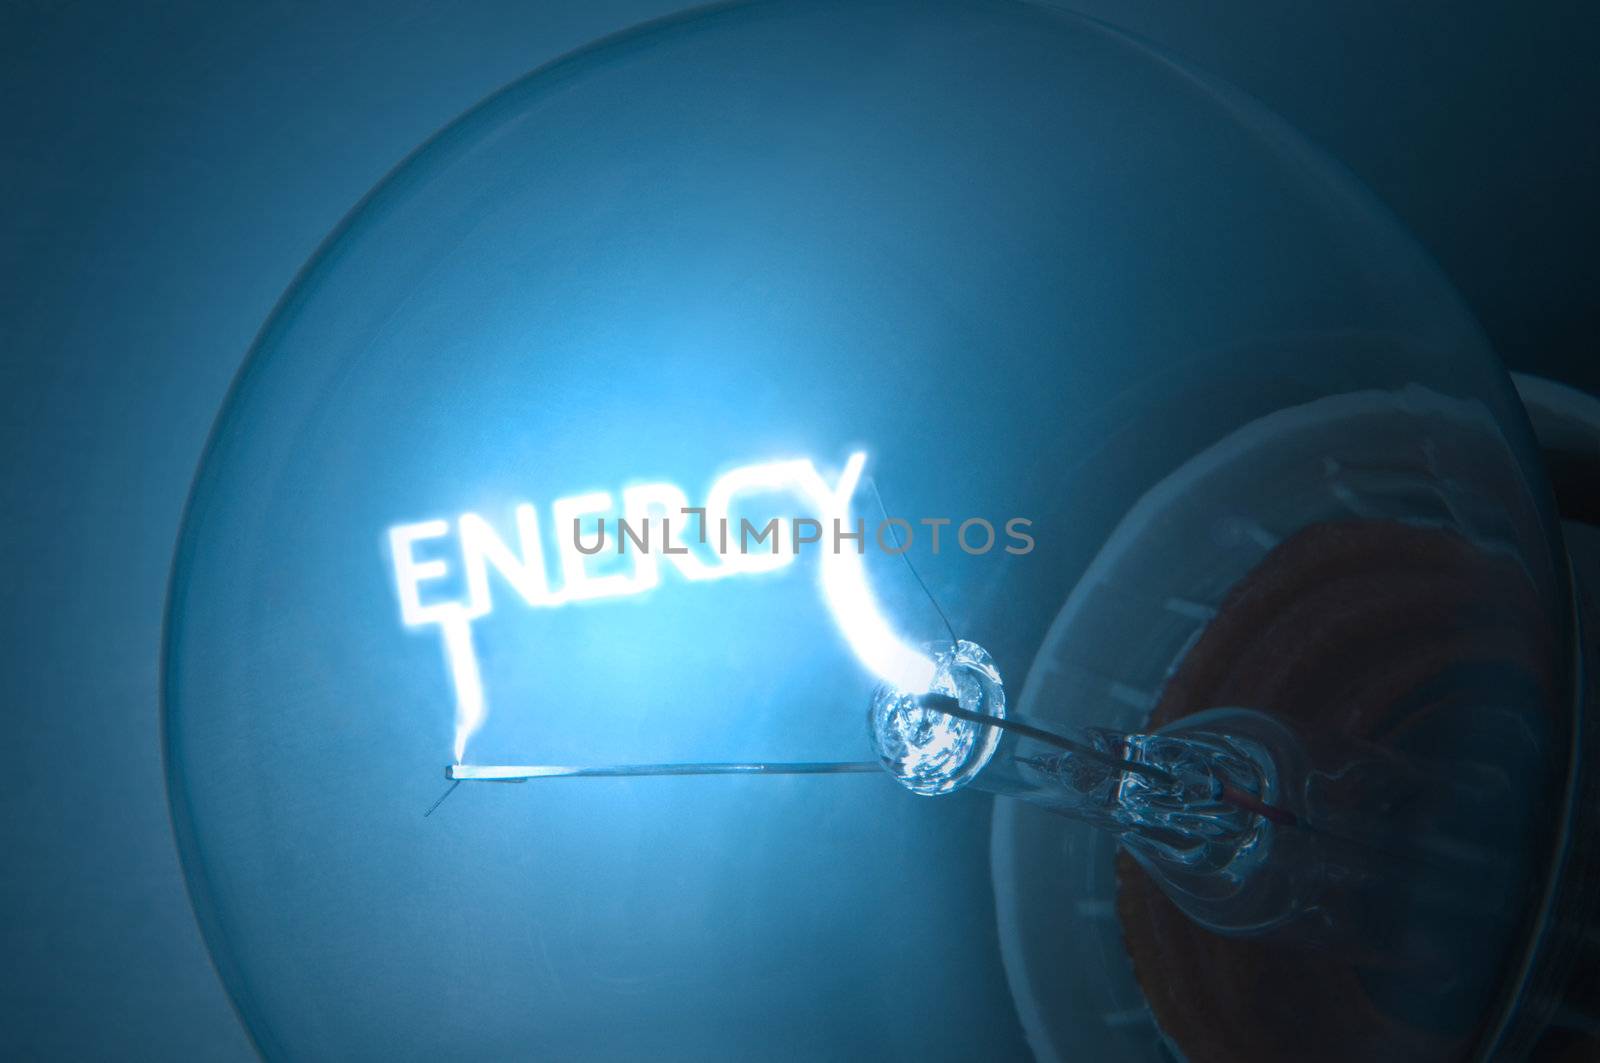 Close up on illuminated blue light bulb filament which spells the word "ENERGY".